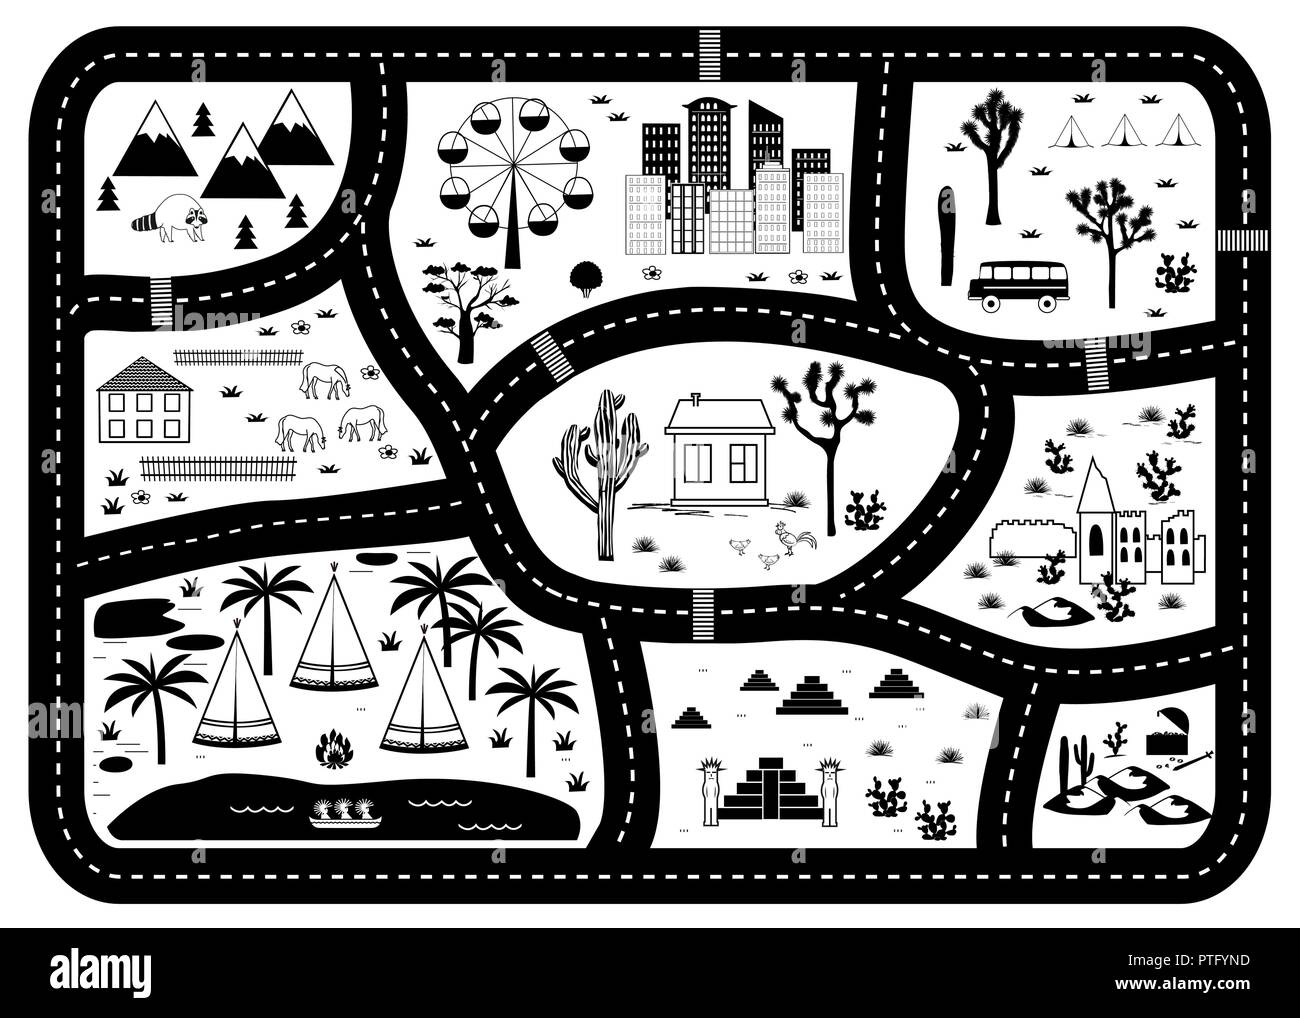 Road, Mountains and Woods Adventure Map. Kids play carpet or poster with native americans tribal elements. Trendy black and white Scandinavian Style.  Stock Vector